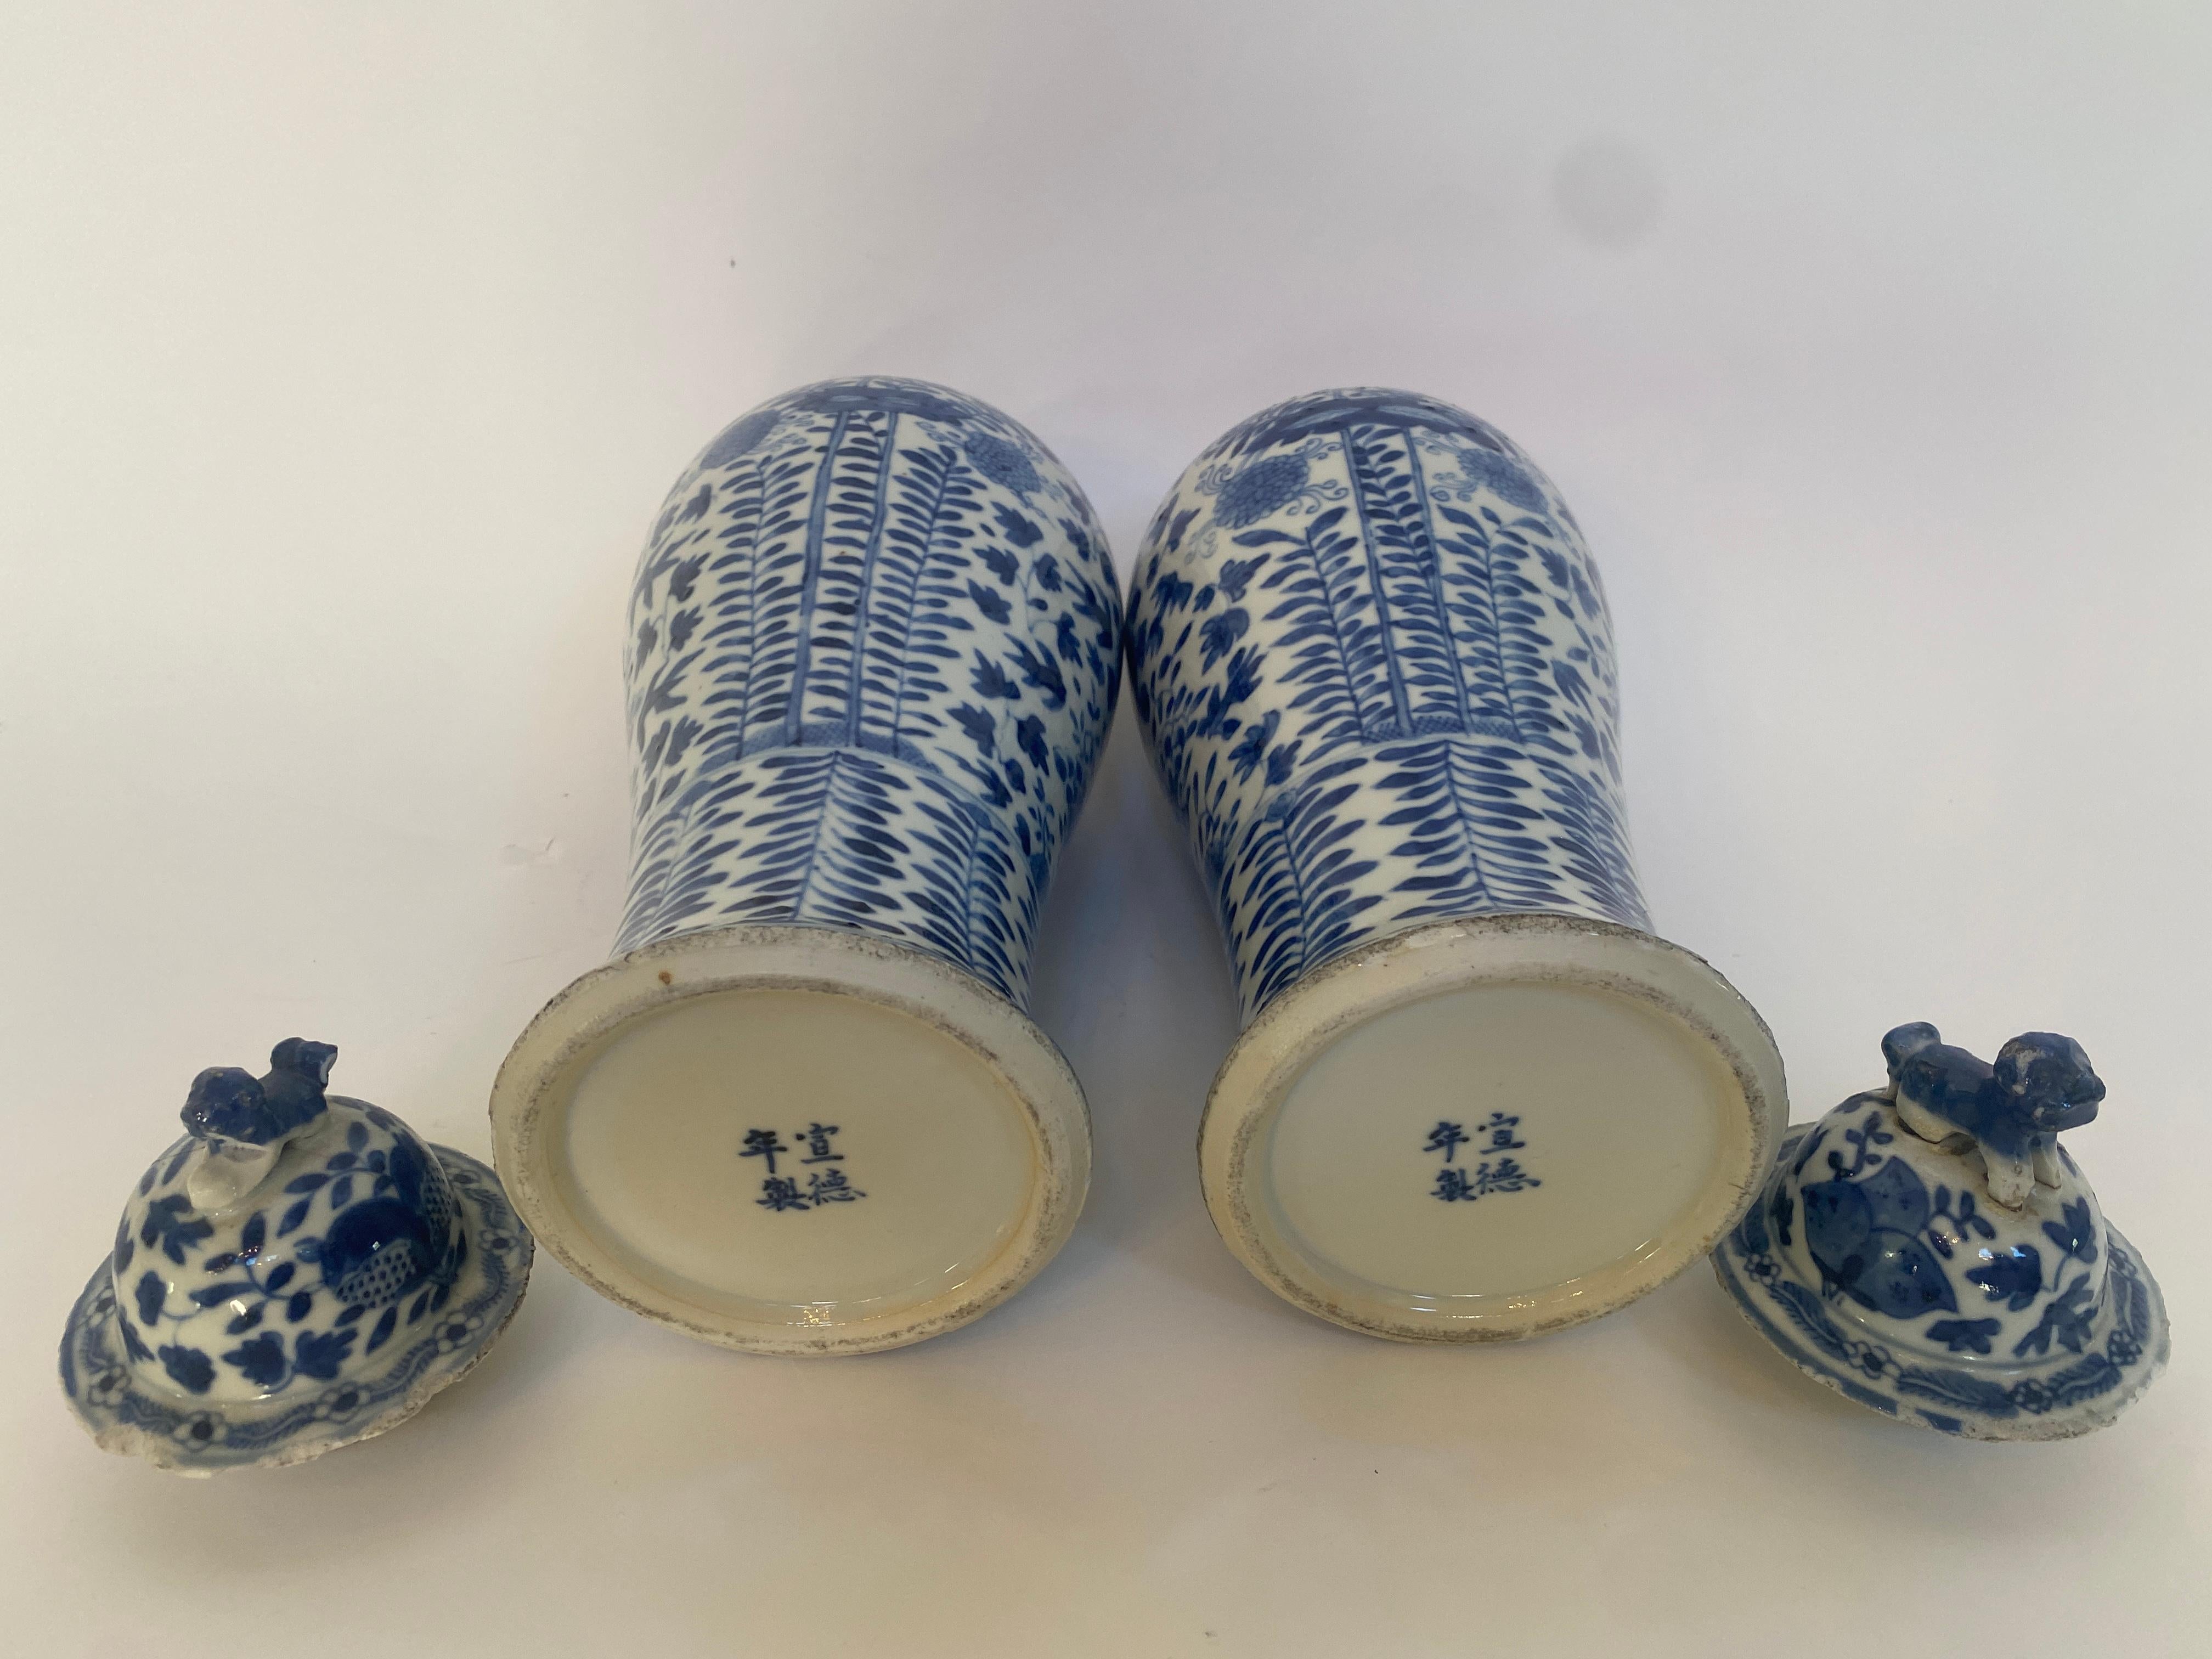 18th Century Antique Pair of Chinese Blue and White Porcelain Jars and Covers For Sale 3